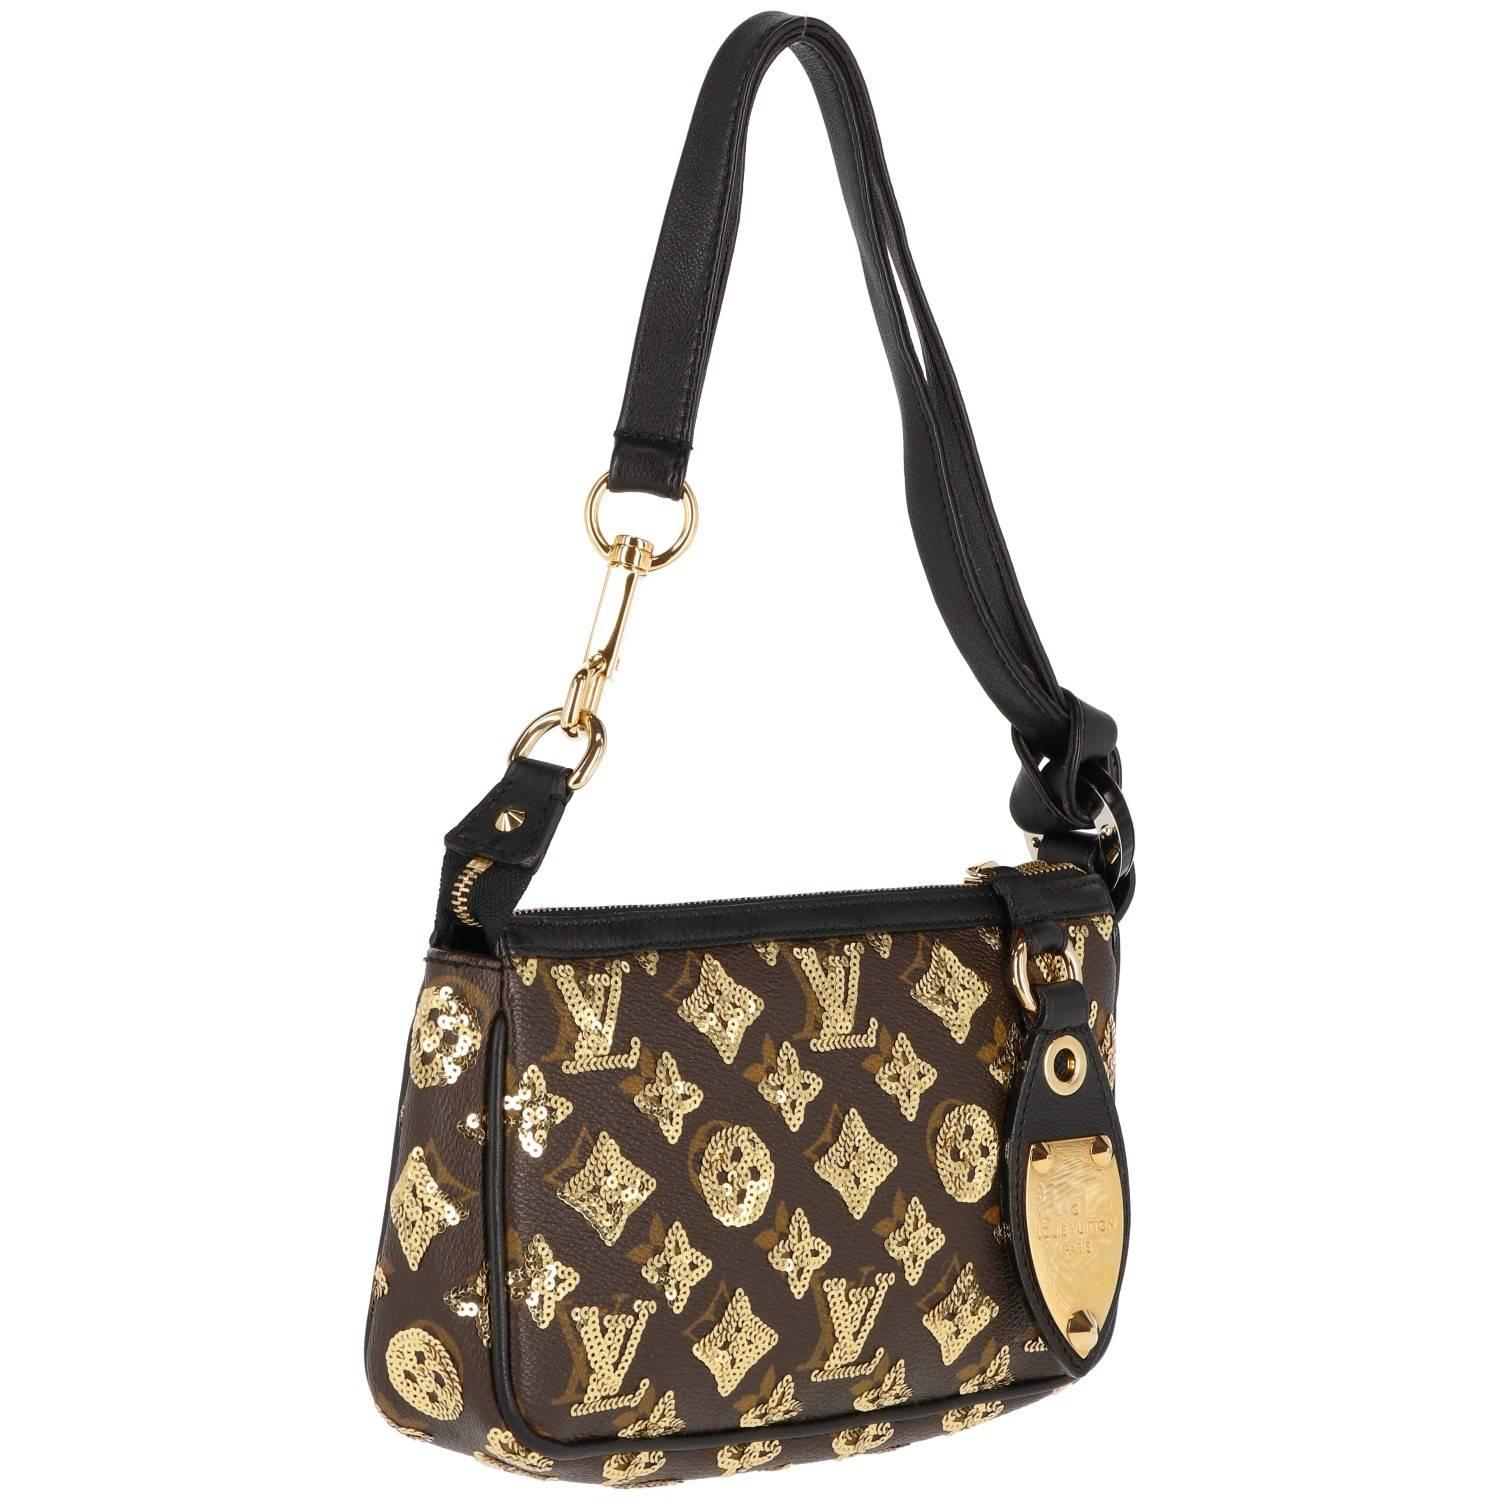 Louis Vuitton vintage monogram sequined and leather clutch. Features golden hardware and sequins and closes with a zip. Black leather handle. Very good conditions.